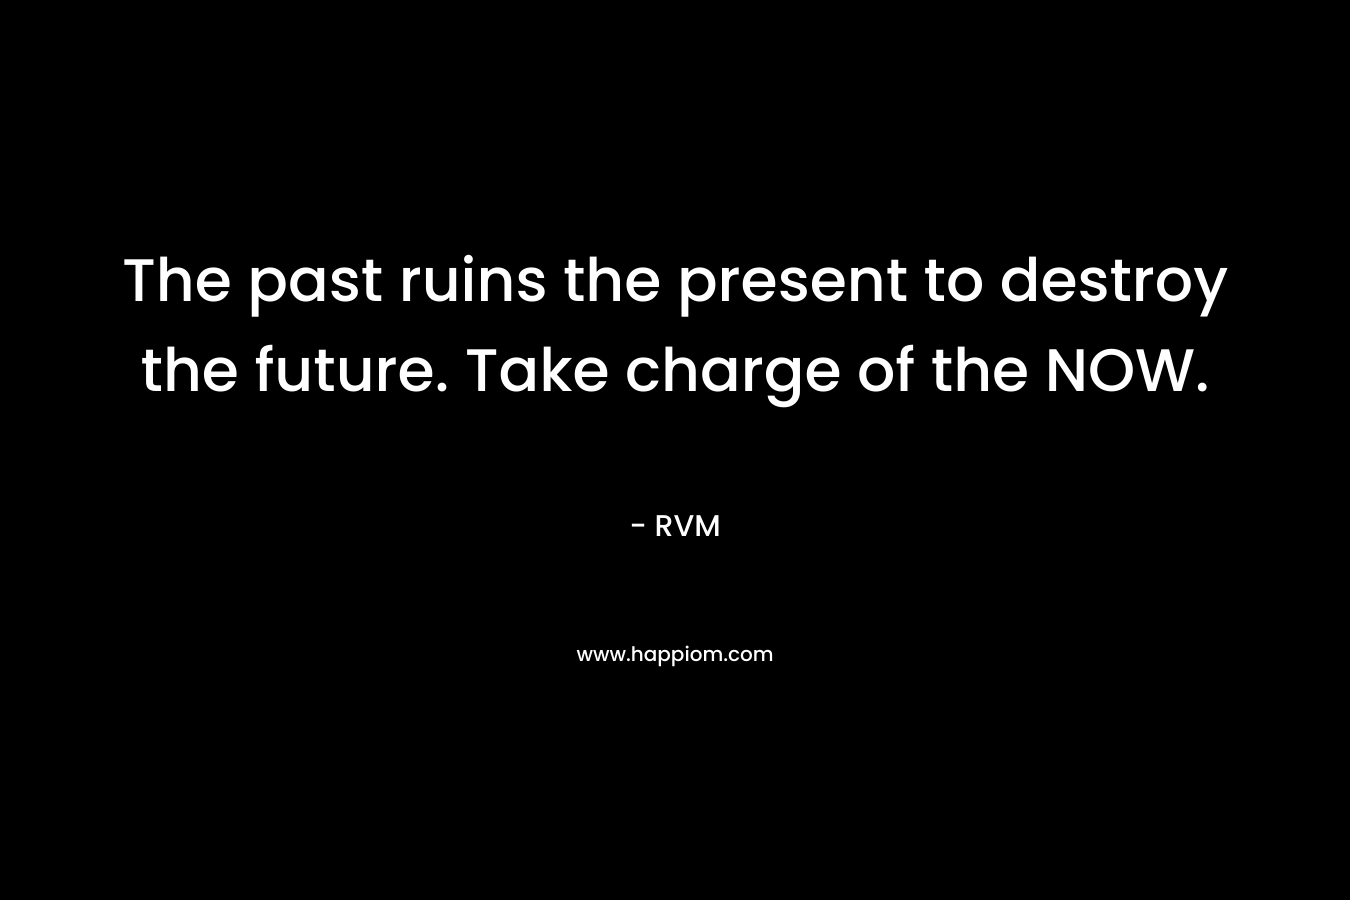 The past ruins the present to destroy the future. Take charge of the NOW.